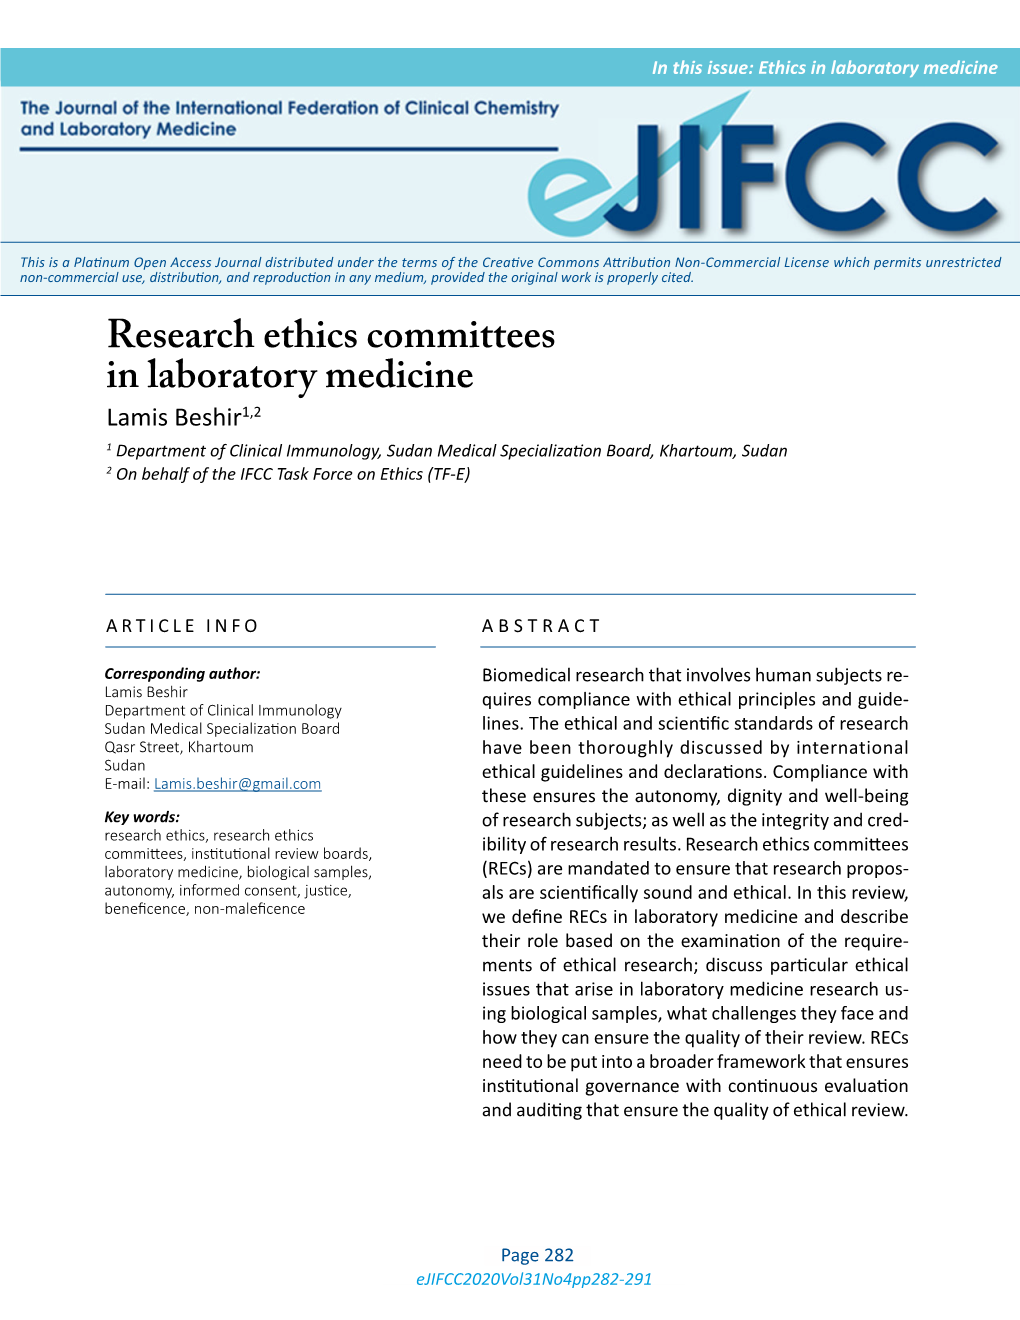 Research Ethics Committees in Laboratory Medicine